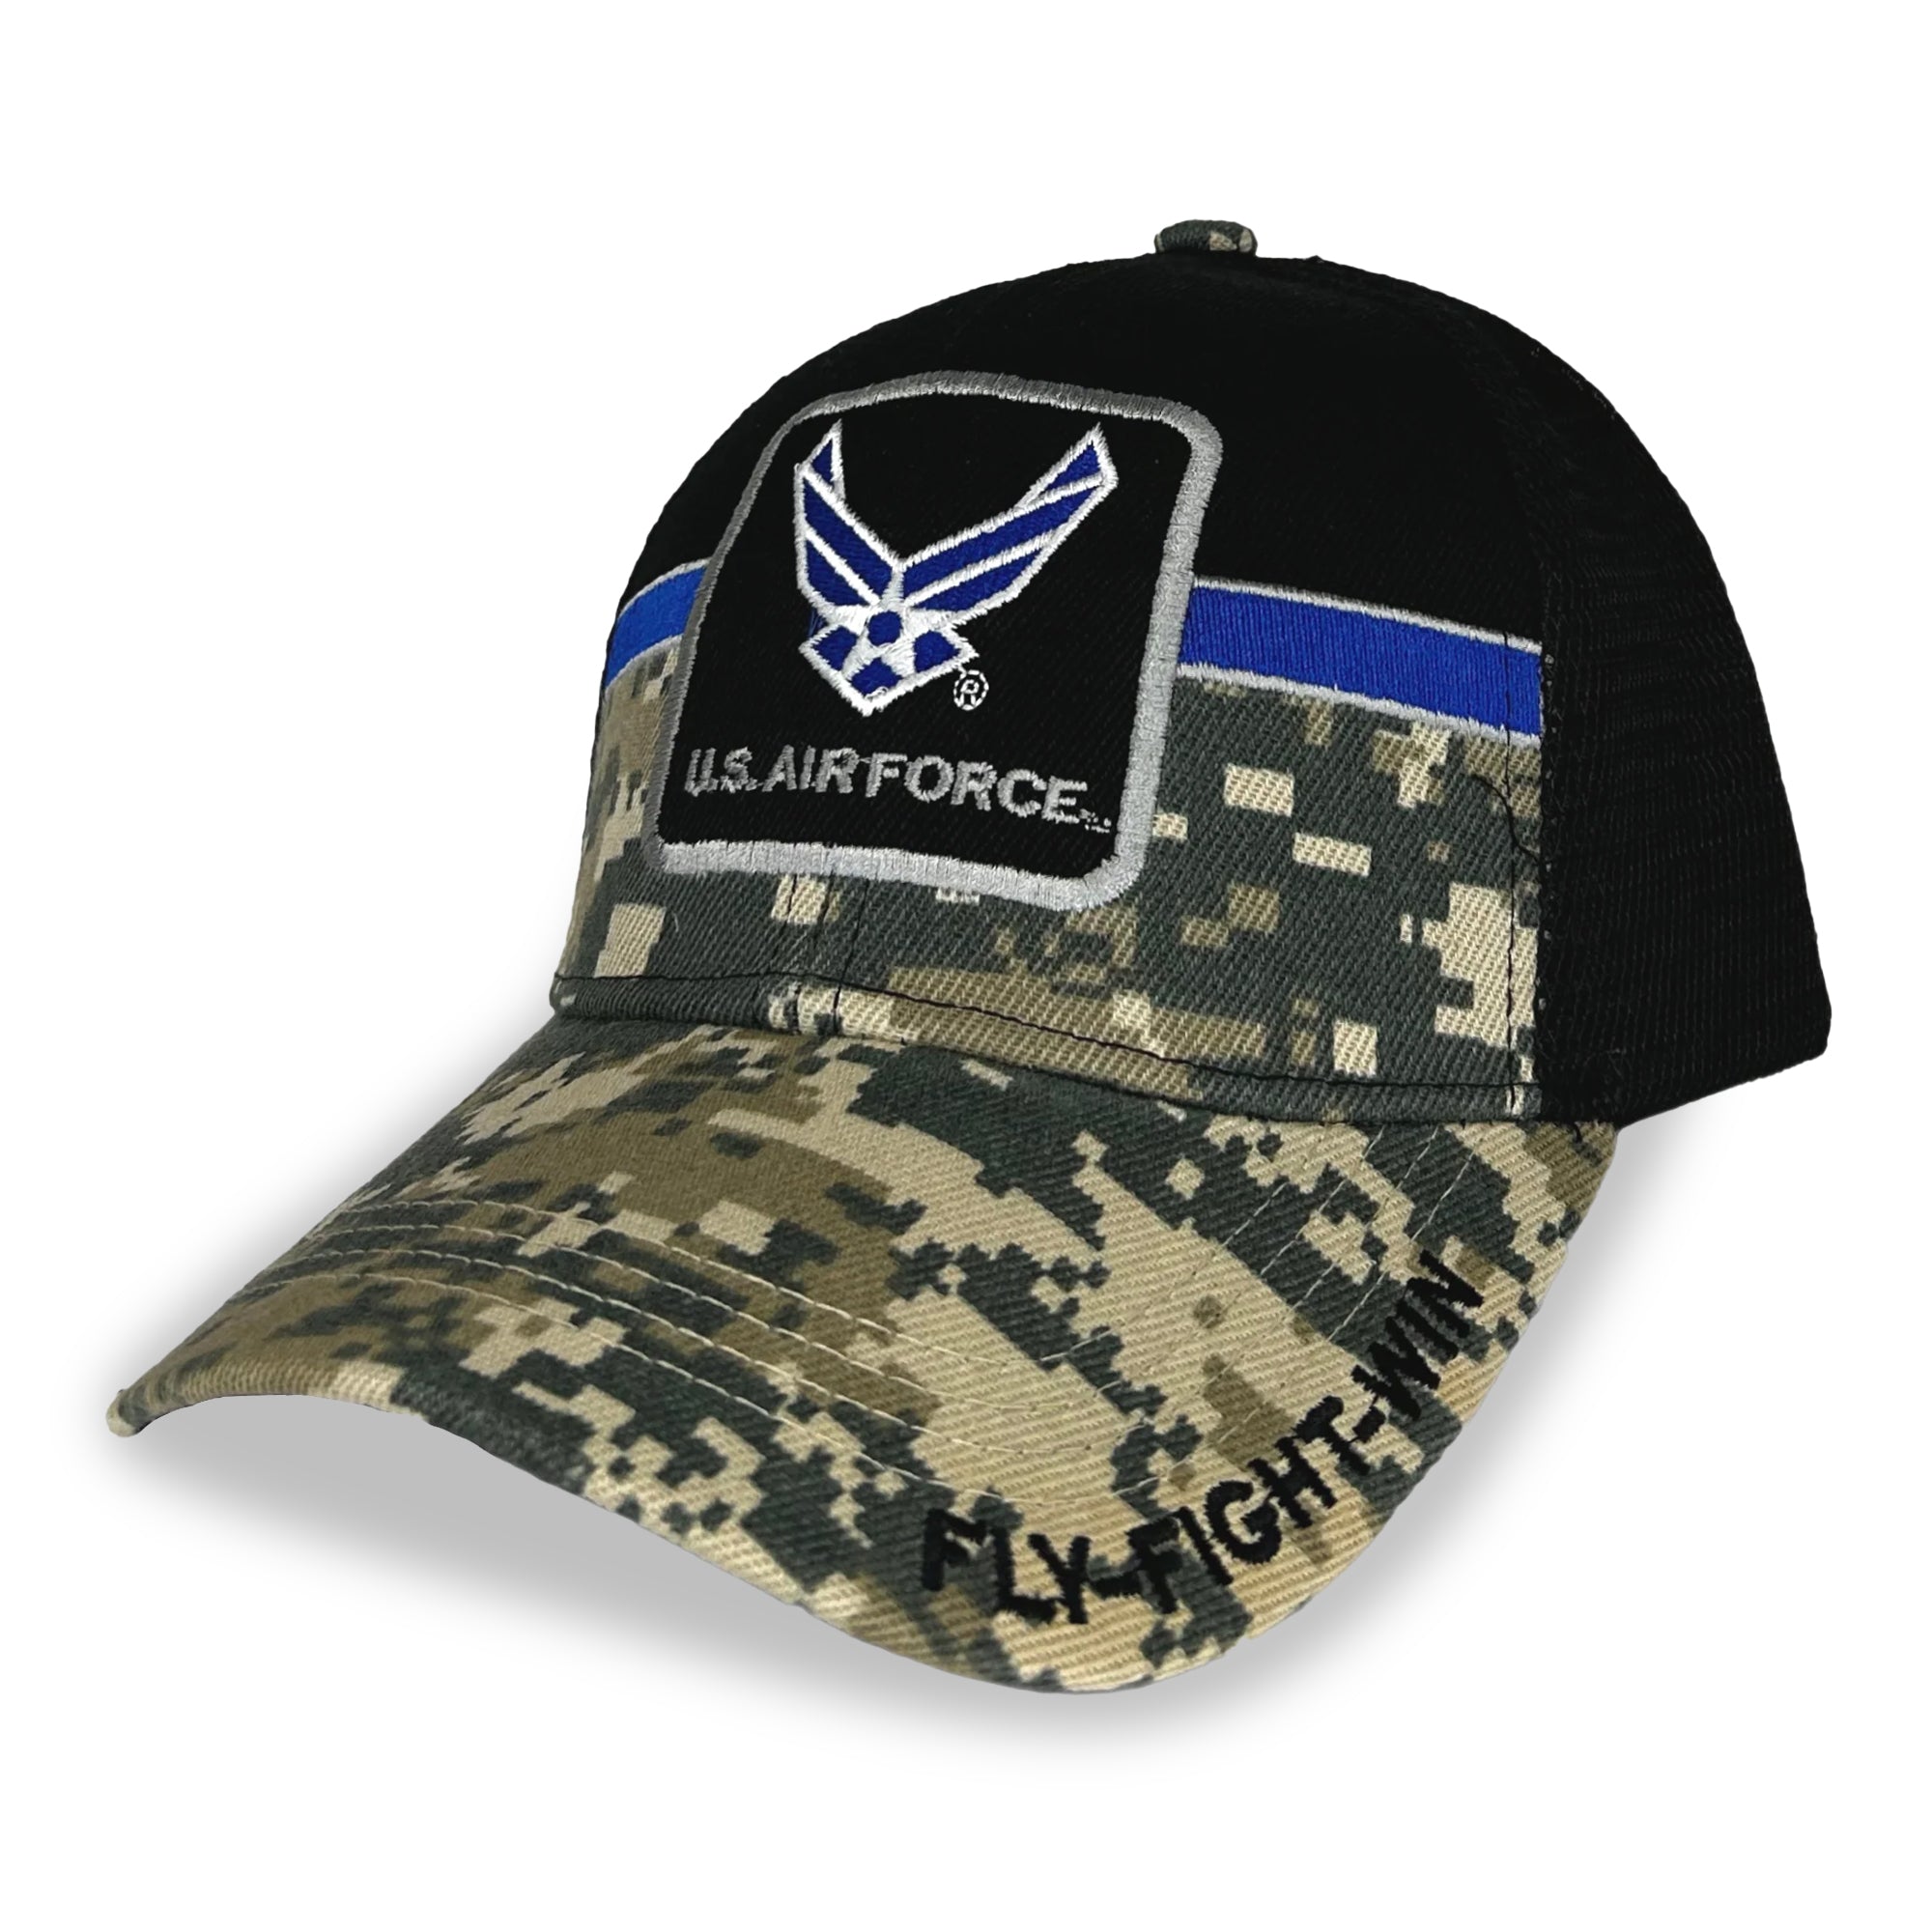 Air Force Medal Of Honor Hat (Camo)